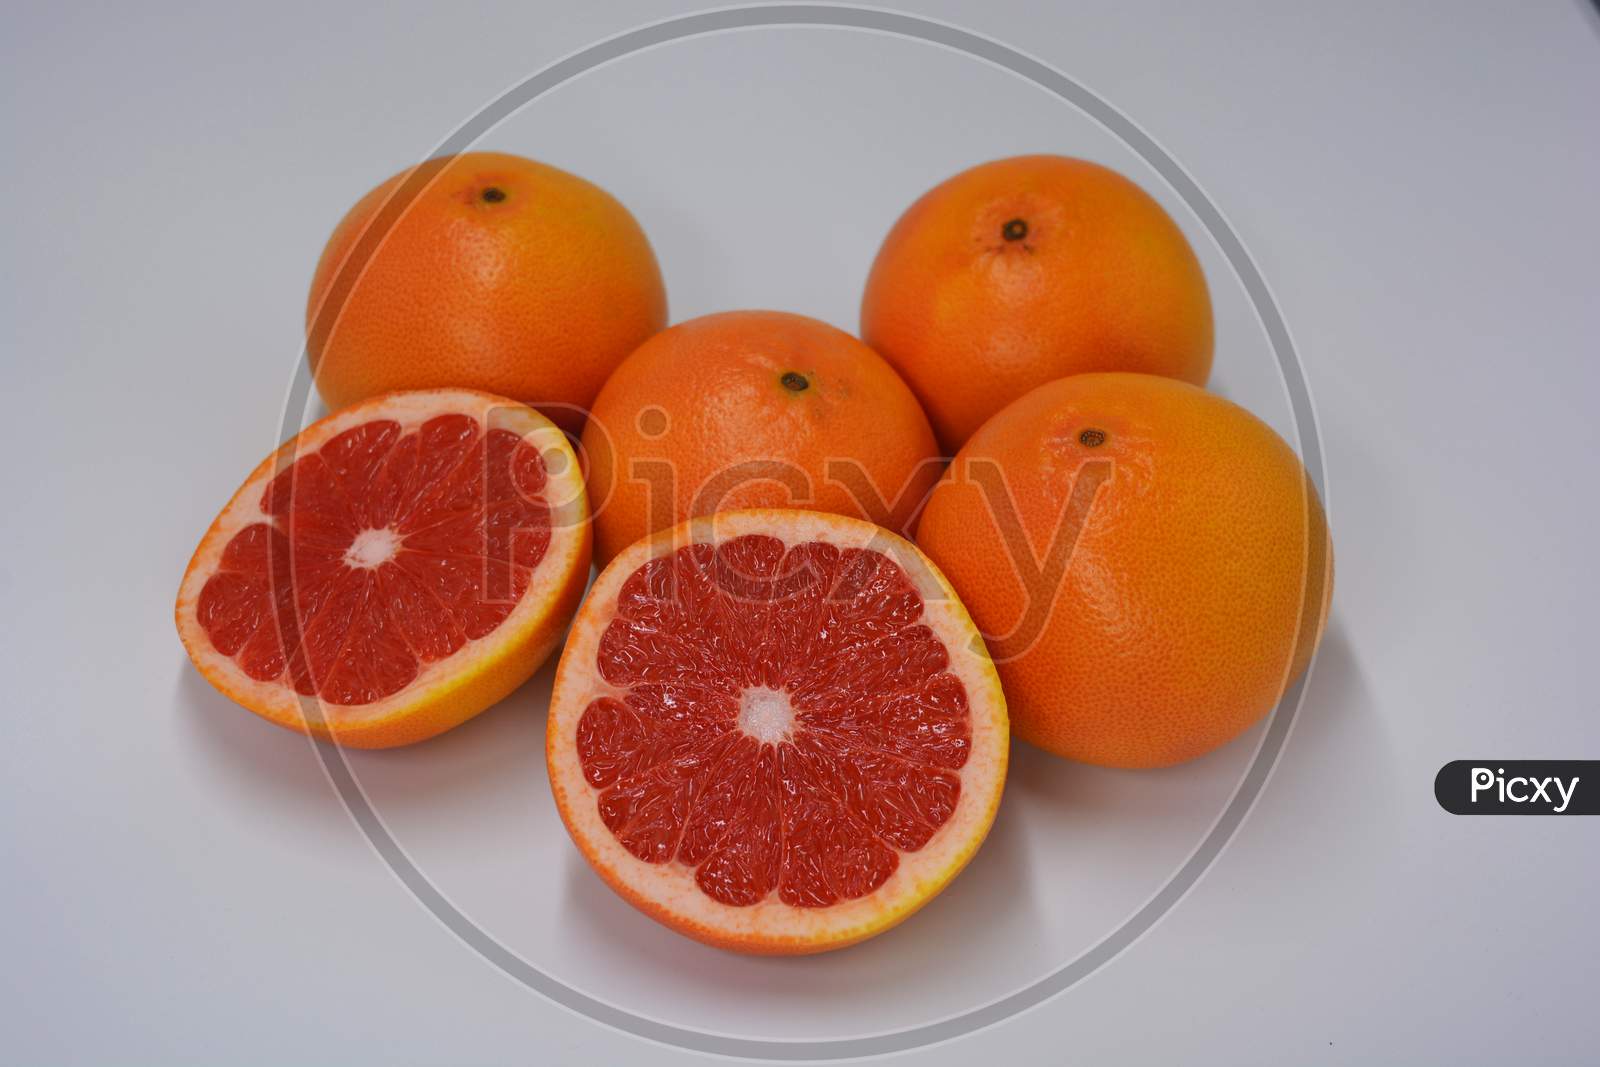 Two halves of a ripe juicy grapefruit, divided into two identical halves, located on a white background. Delicious and healthy sweet and sour fruits for the human body and health.